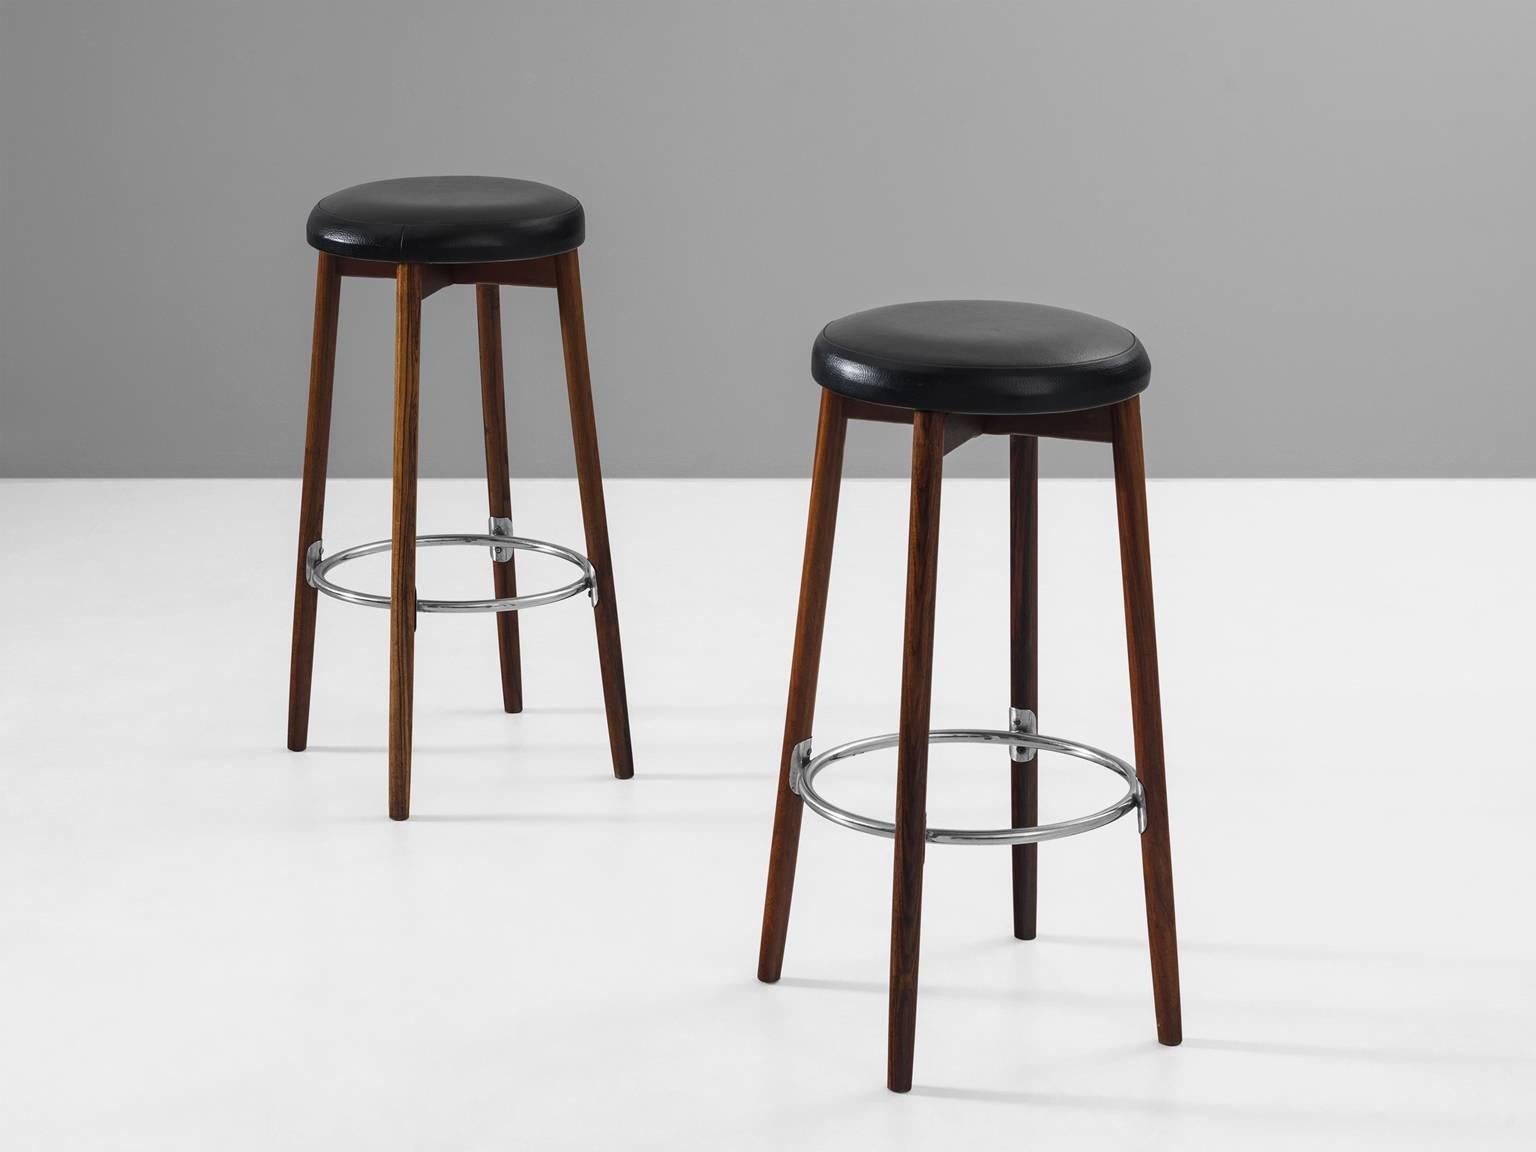 Barstools, leather metal and rosewood, 1970s, Europe.

This strong set of two bar stools is very solid in appearance. The metal ring that connects the four mahogany legs is perfectly mirrored in the black leather seat. The wood that serves as a base